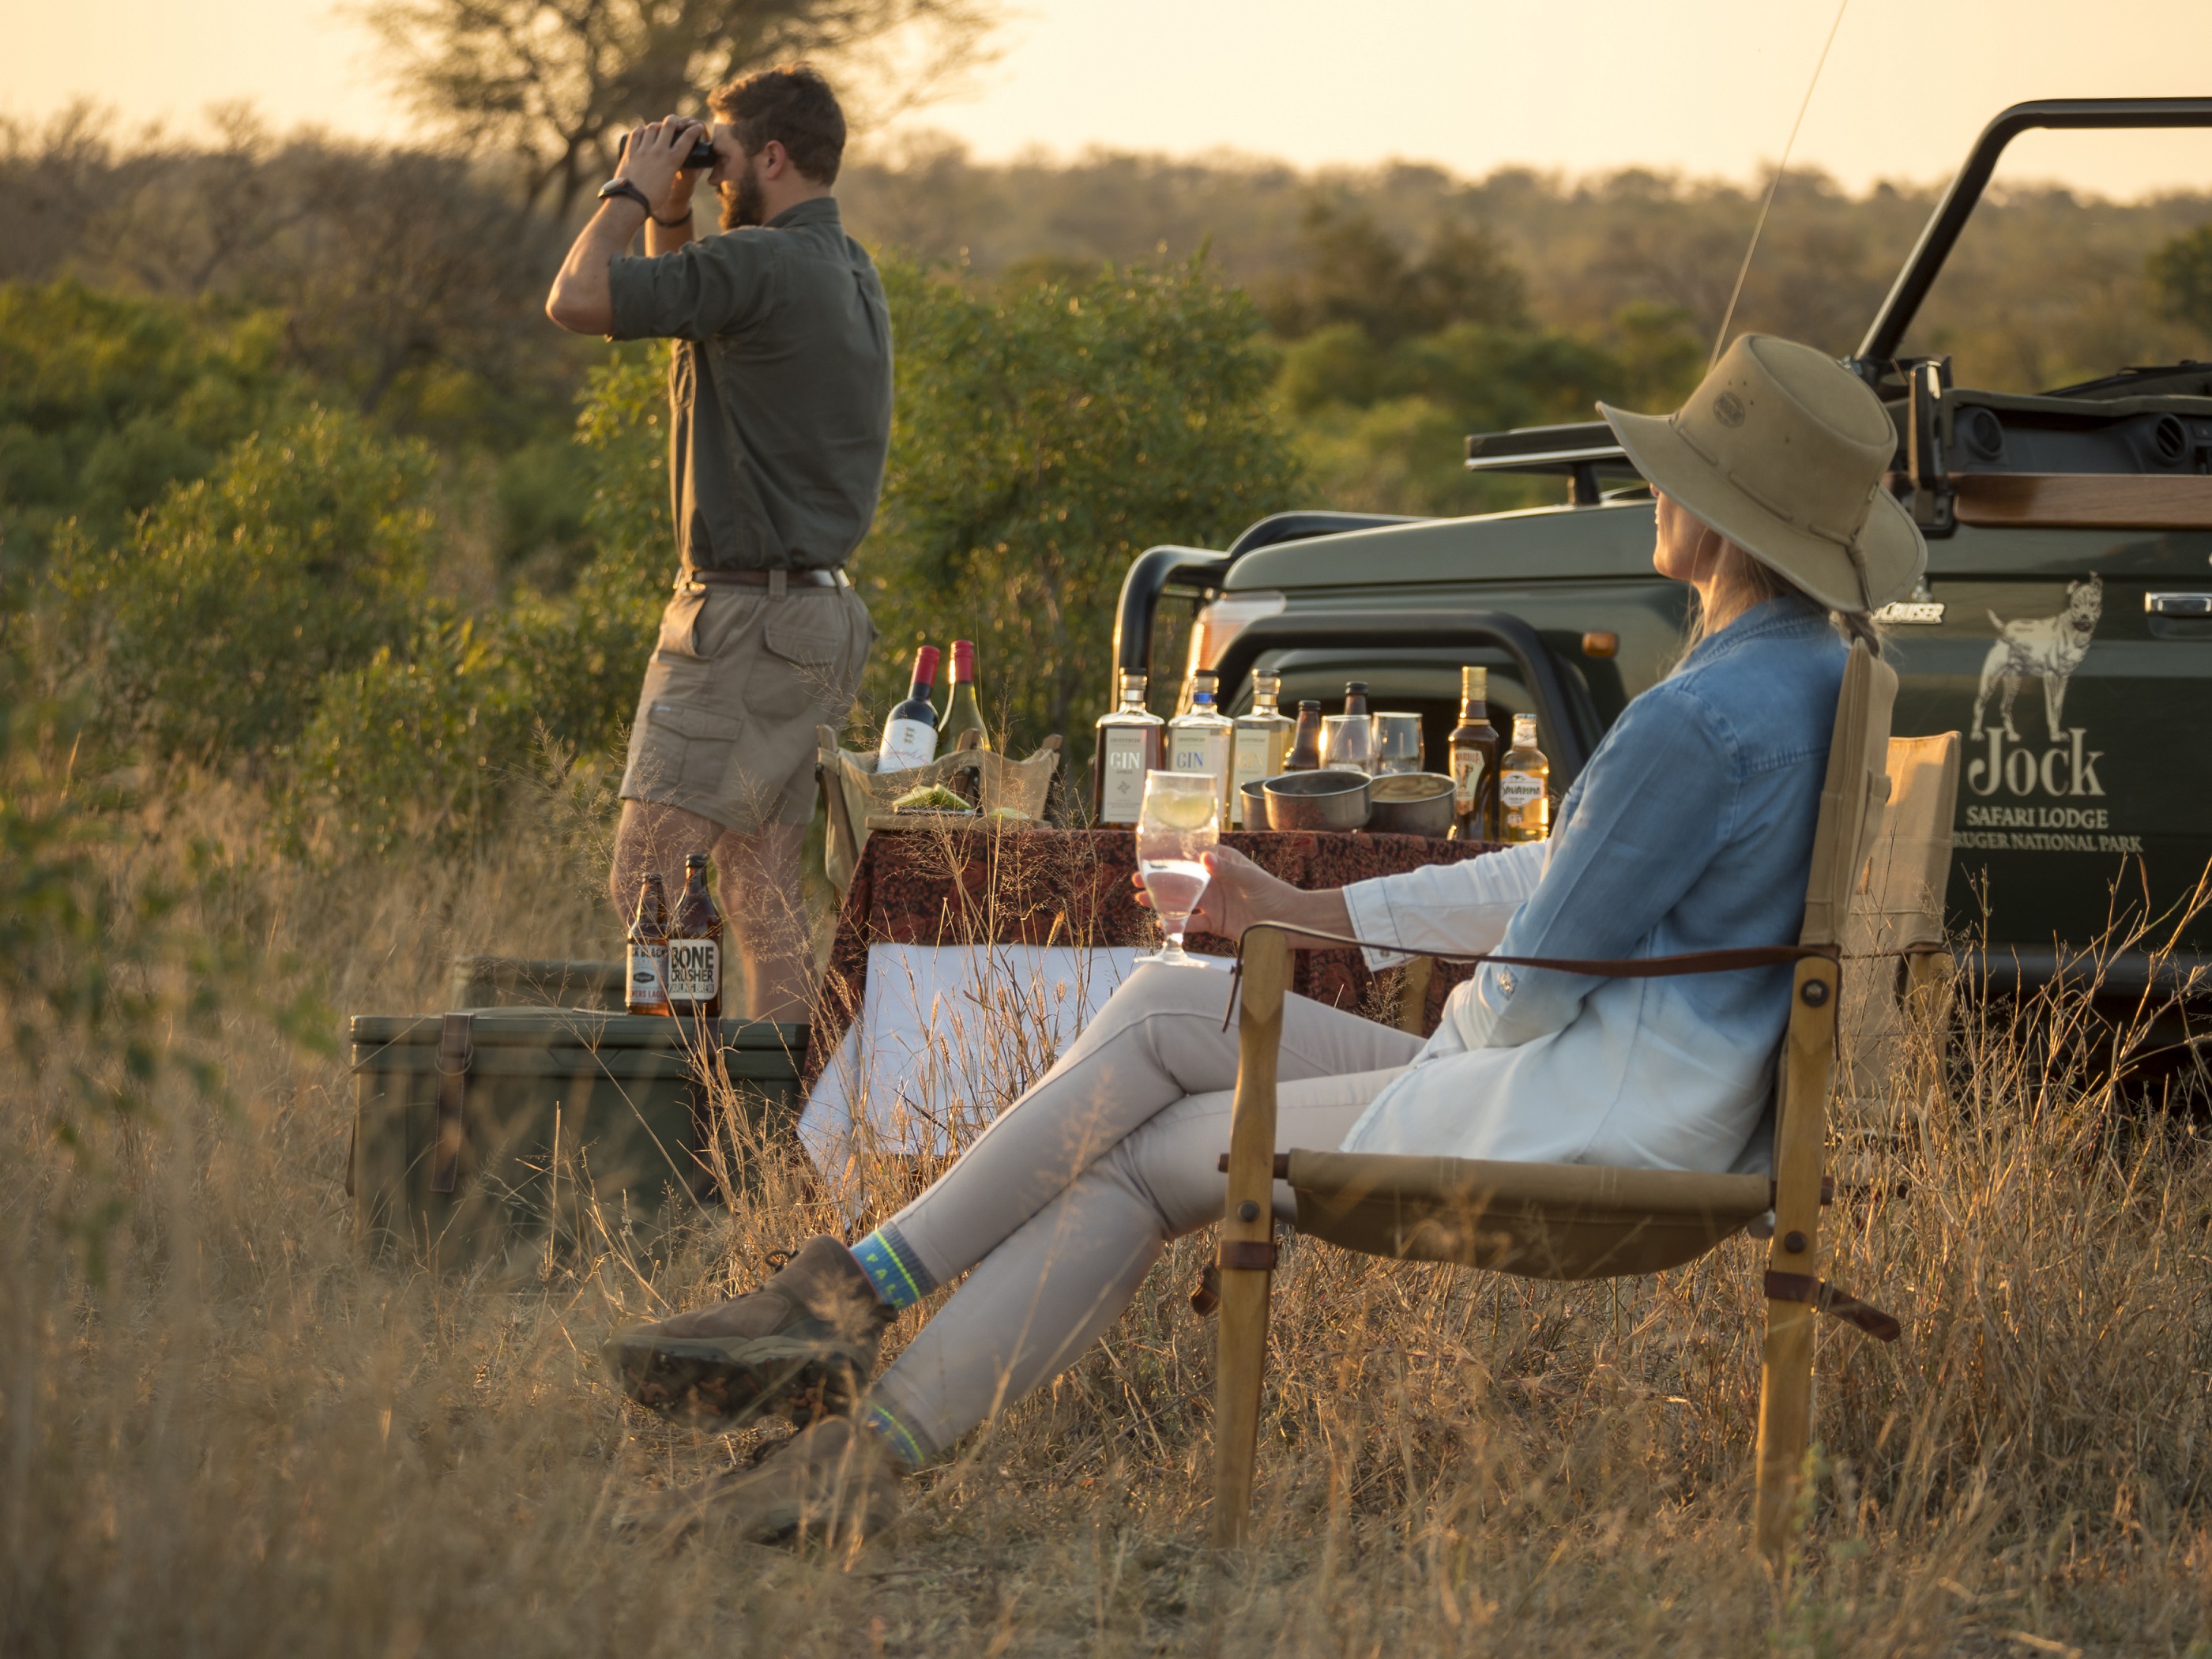 cape town and kruger safari packages uk